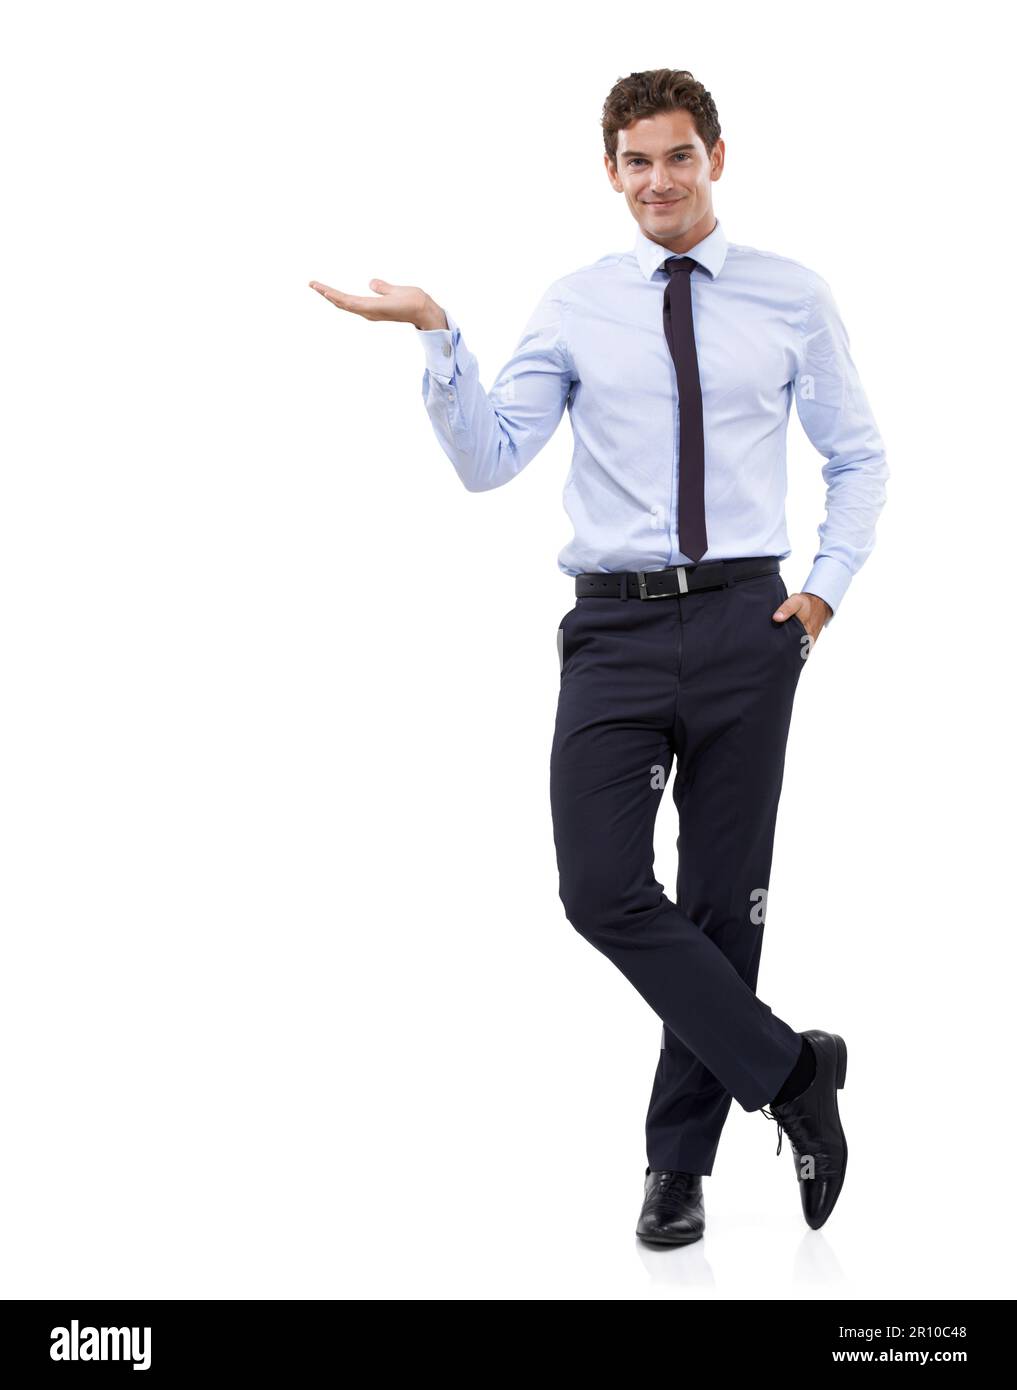 Your product is in good hands. A young businessman displaying copyspace. Stock Photo